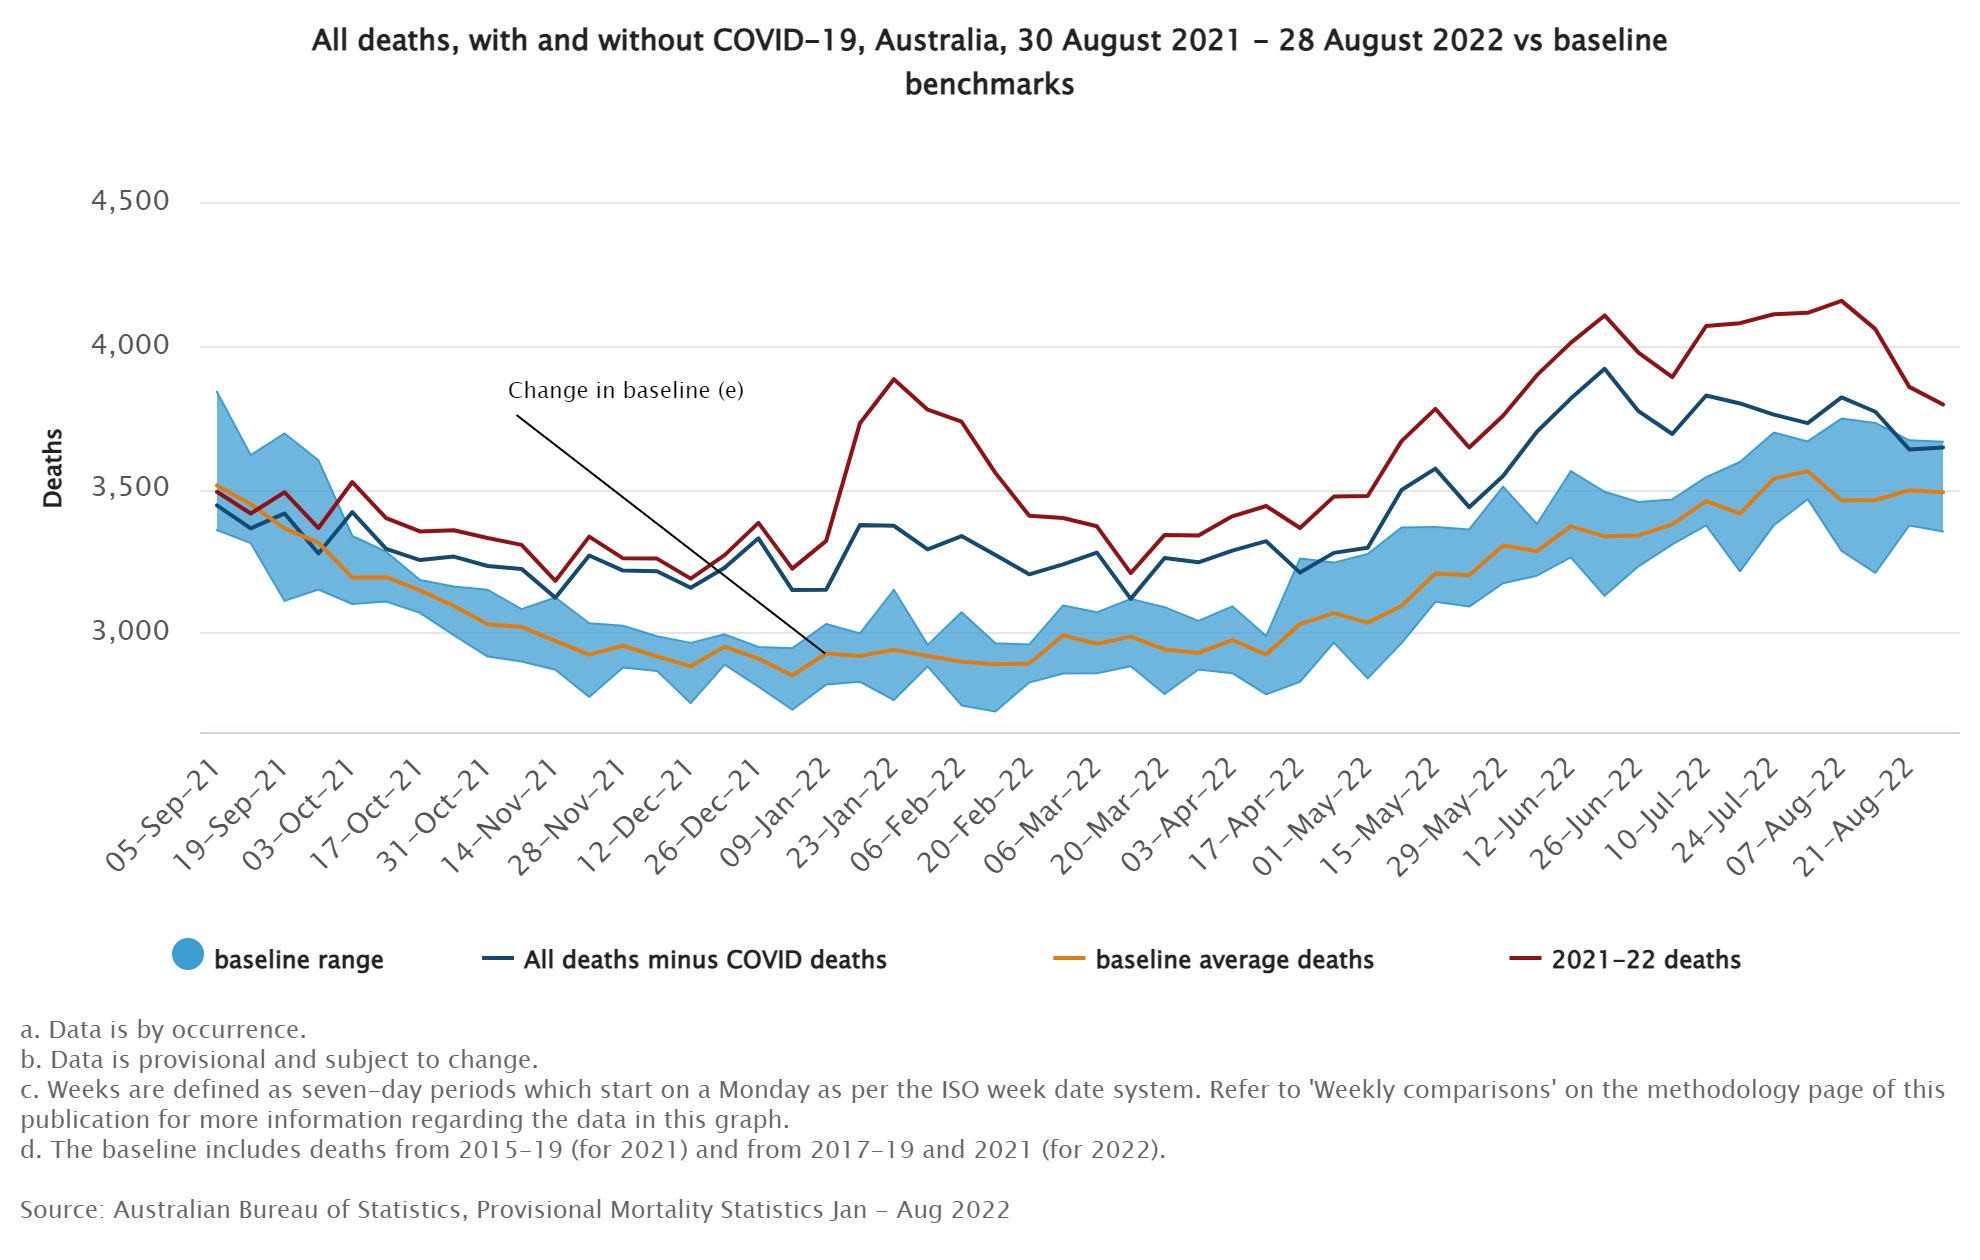 All deaths, with and without COVID-19, Australia, 30 August 2021 - 28 August 2022 vs baseline benchmarks (1).jpeg